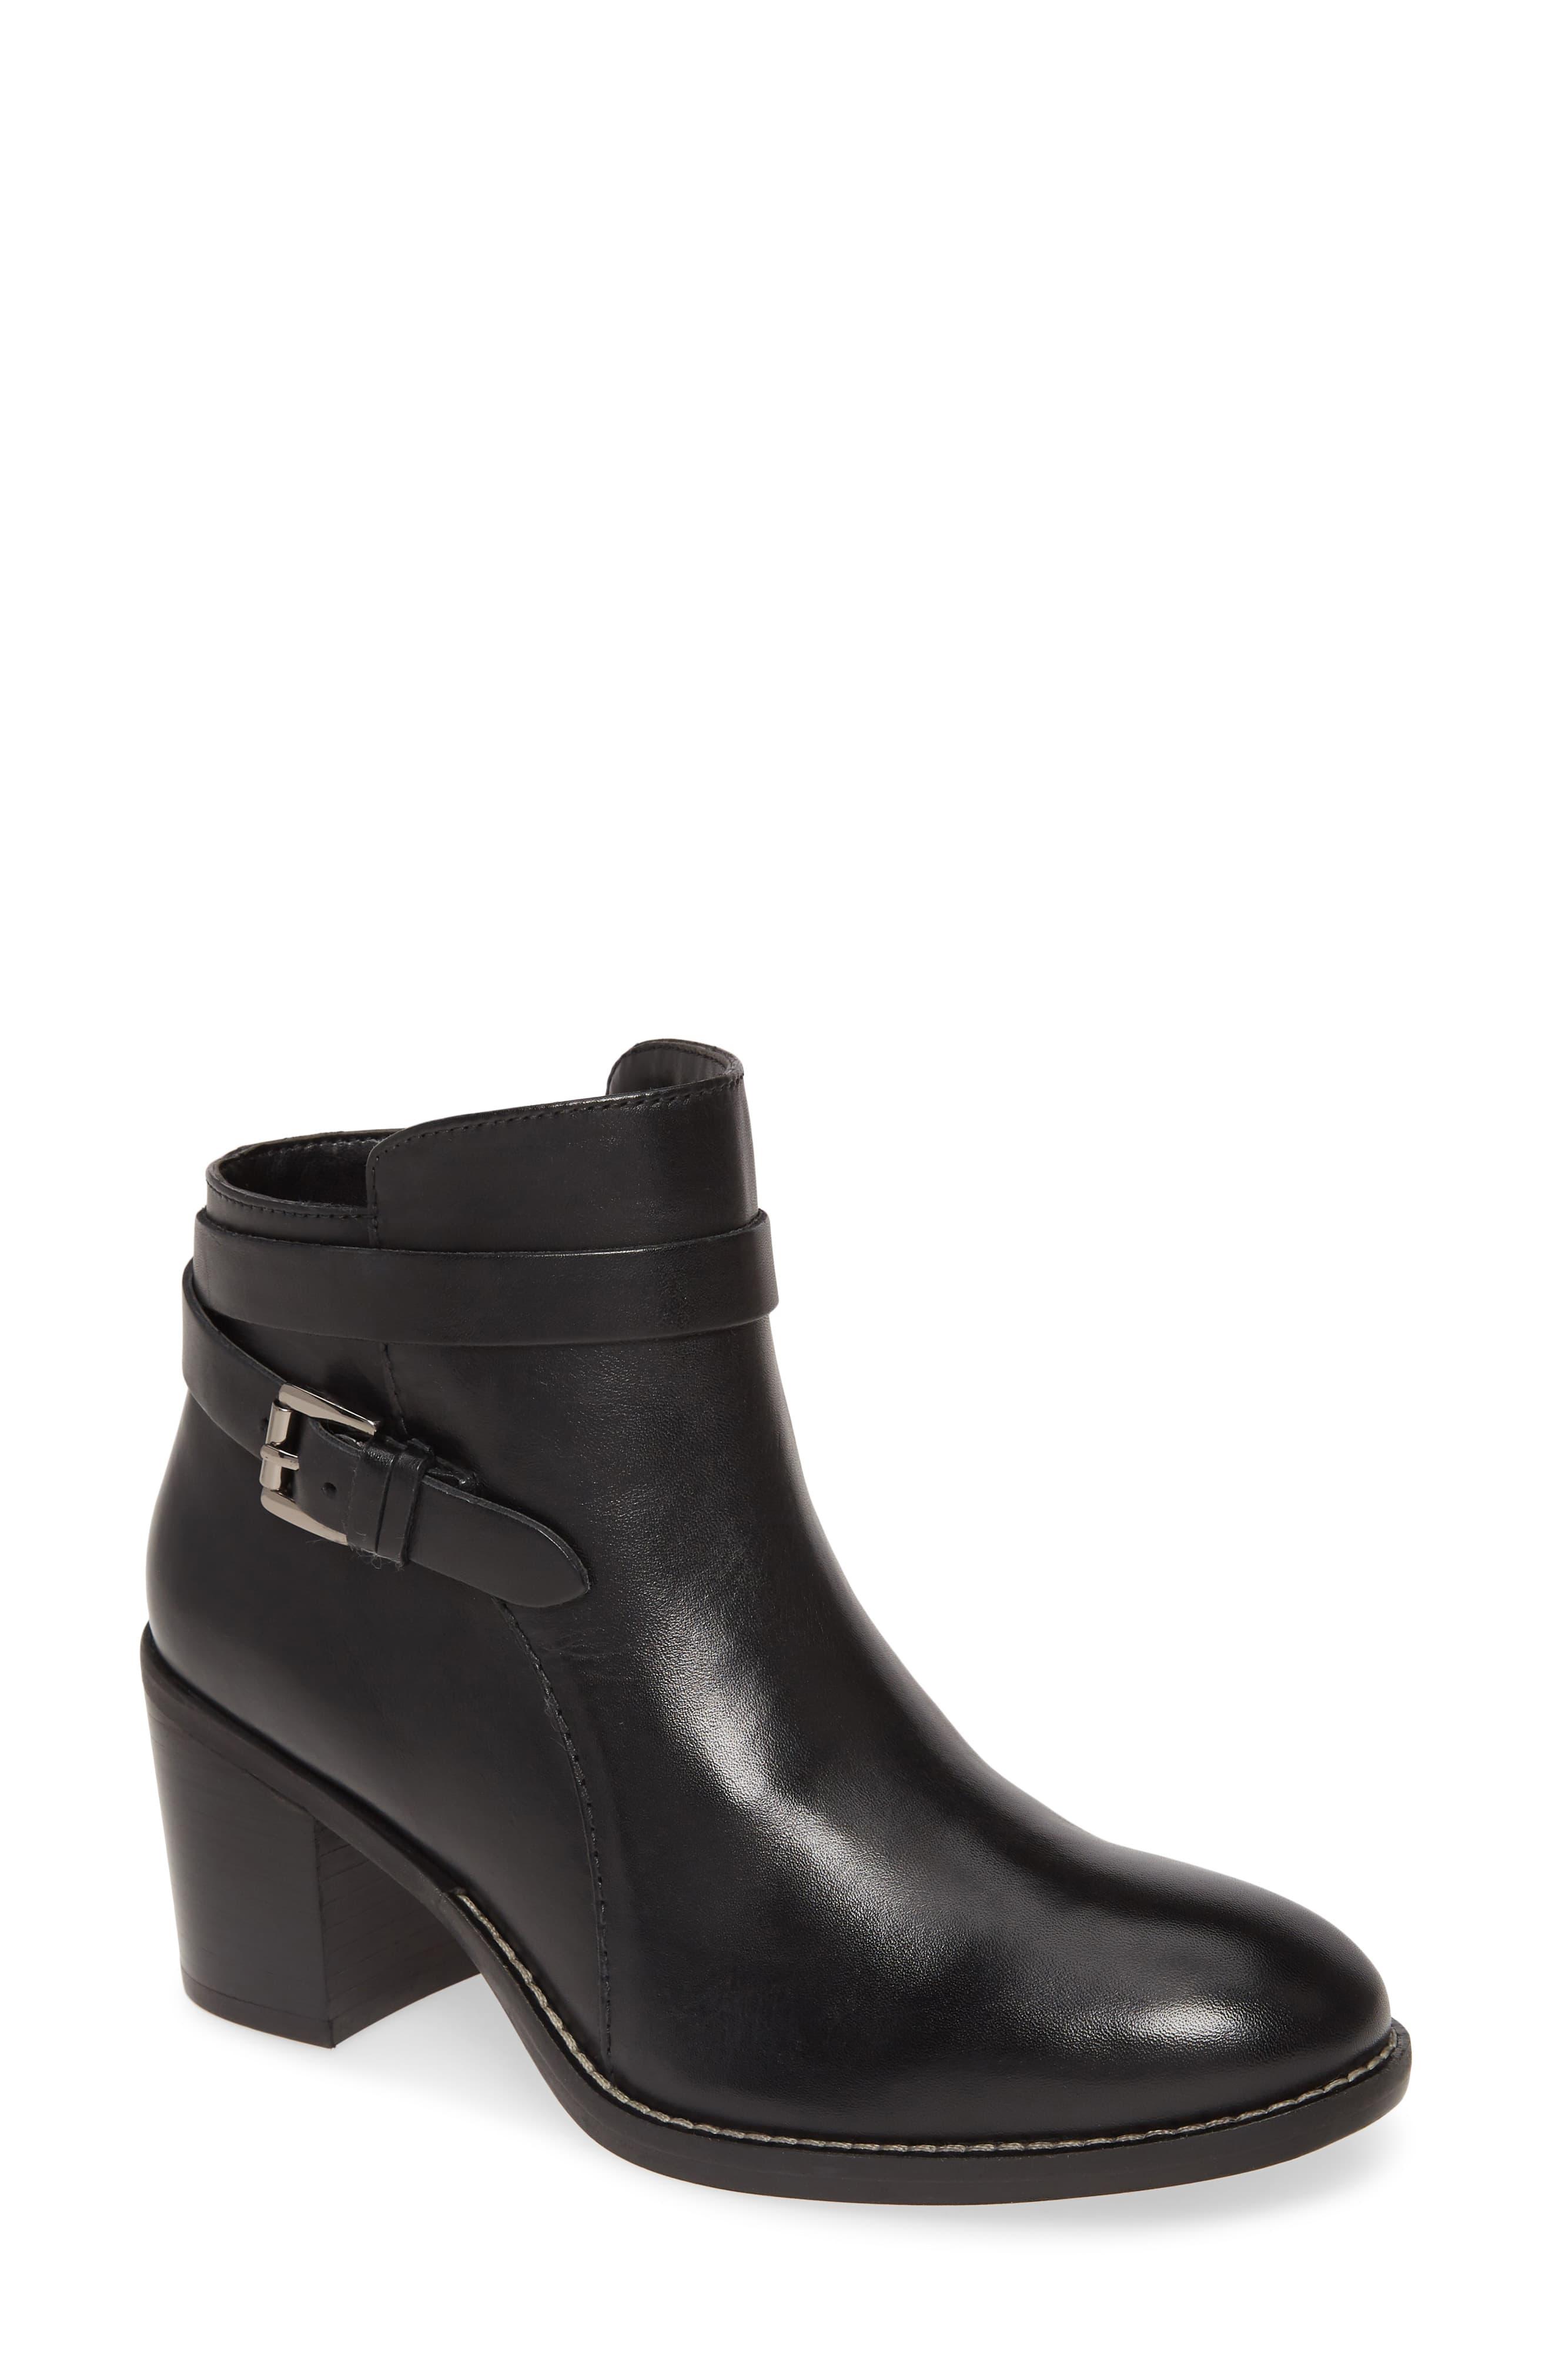 Hush Puppies Hannah Bootie in Black Leather (Black) - Lyst